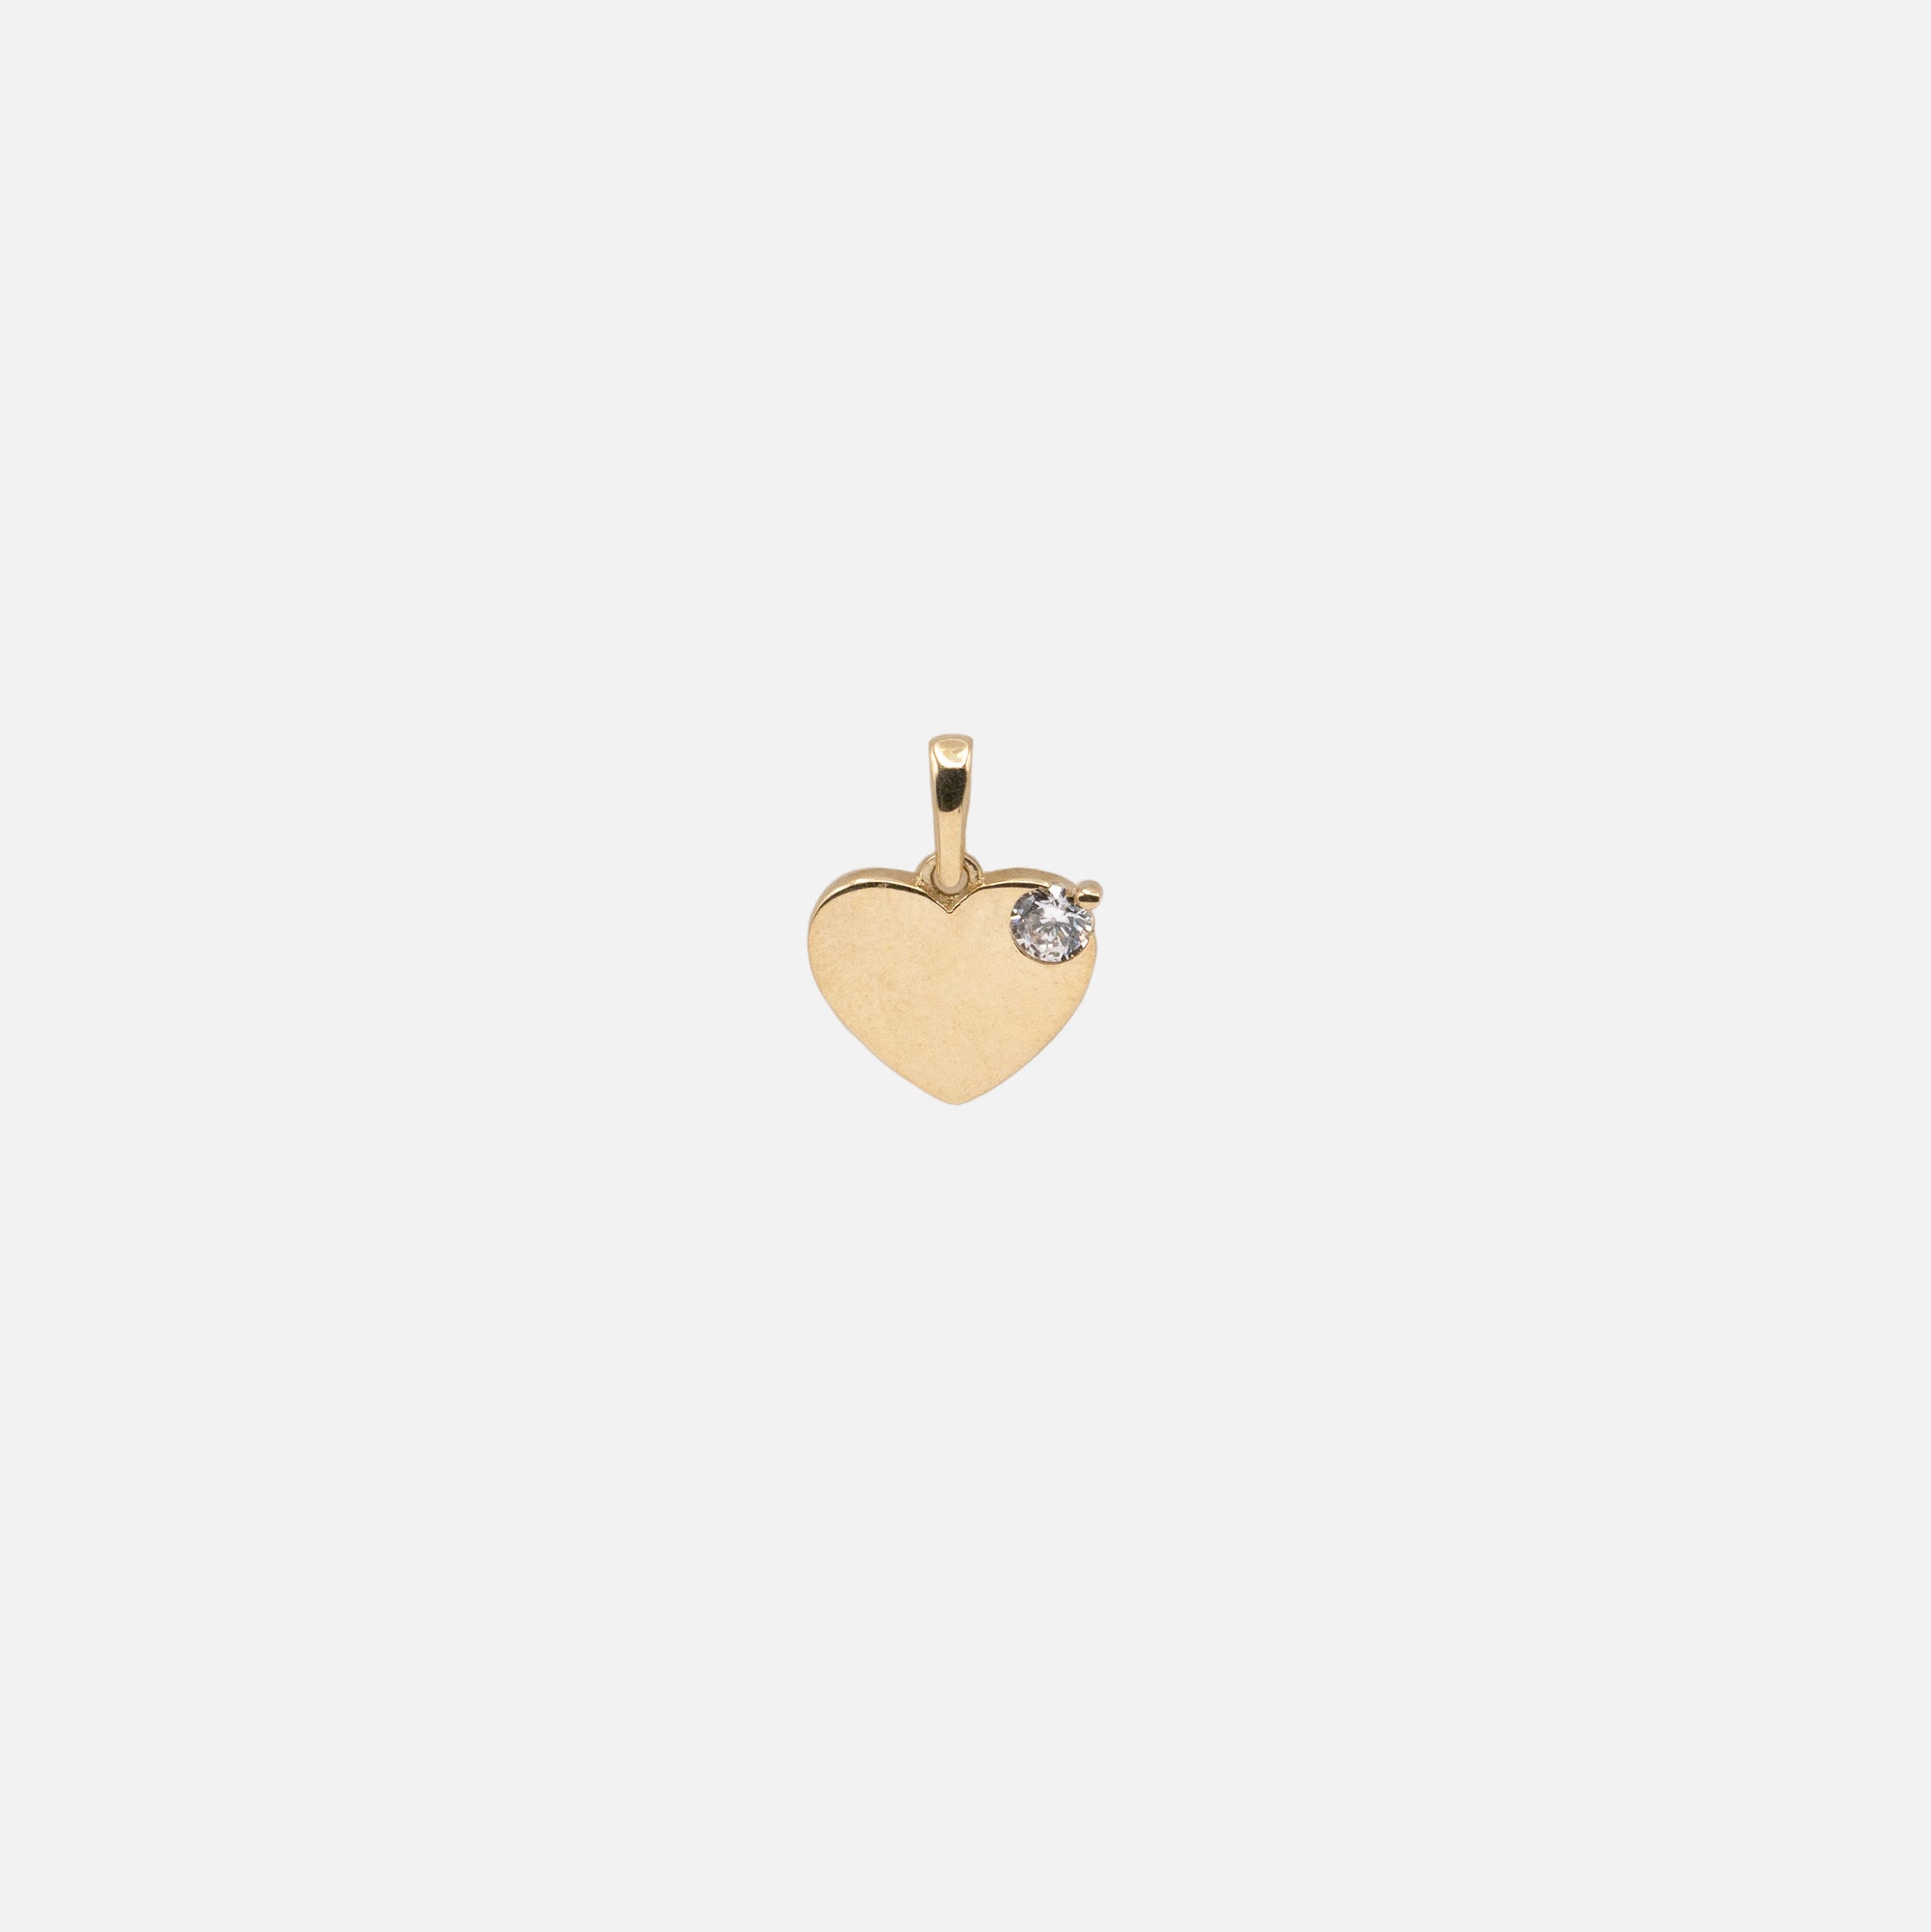 Full Heart Charm with Cubic Zirconia in 10k Gold